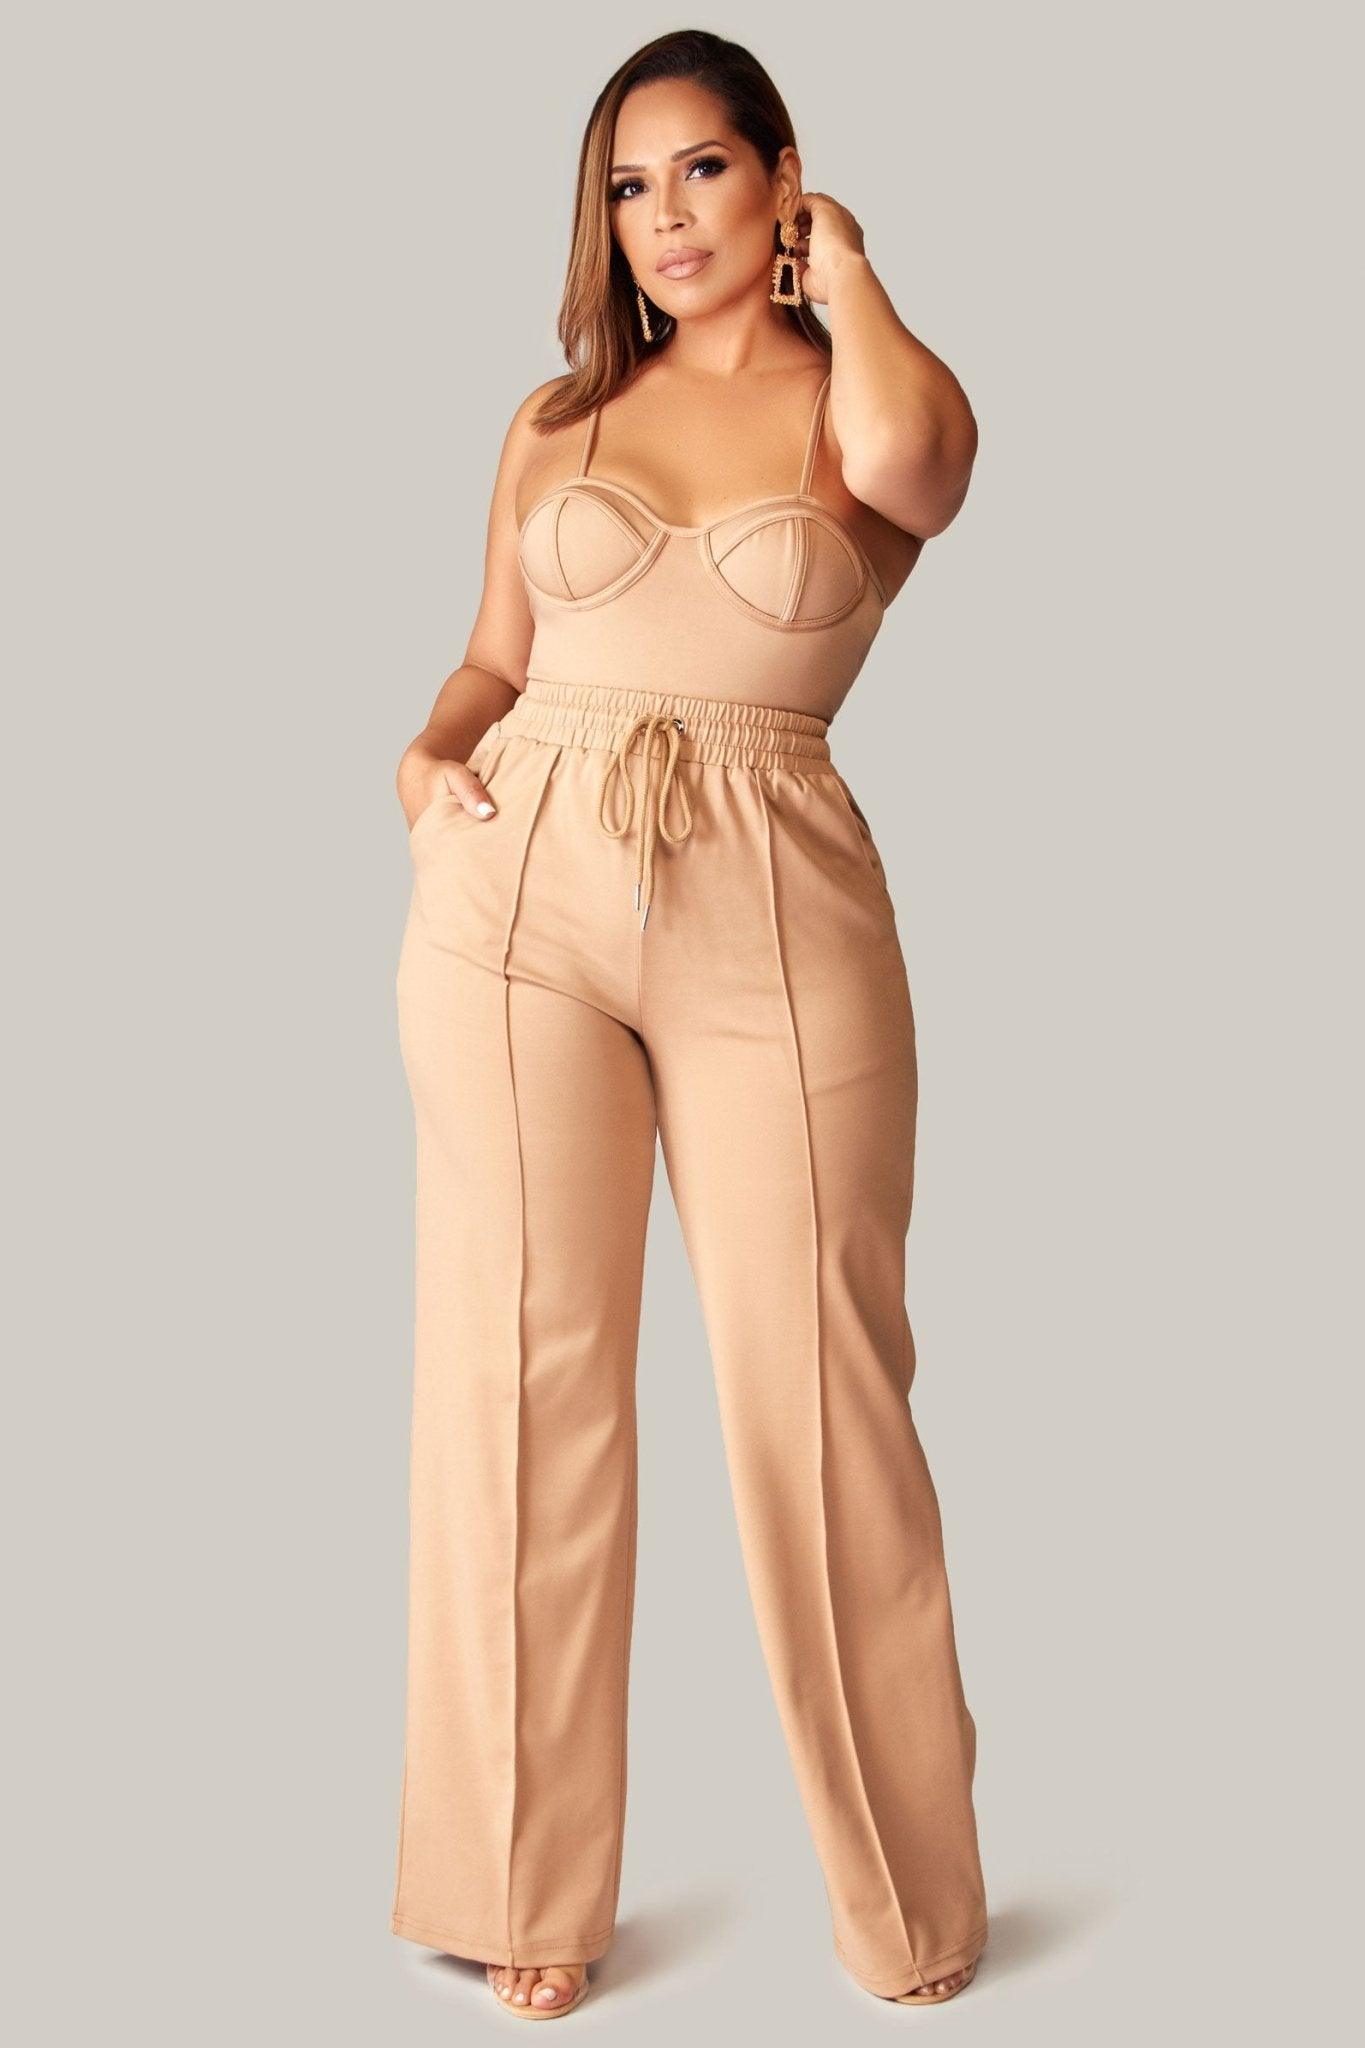 Rhiana High Couture 2 PC Set - MY SEXY STYLES